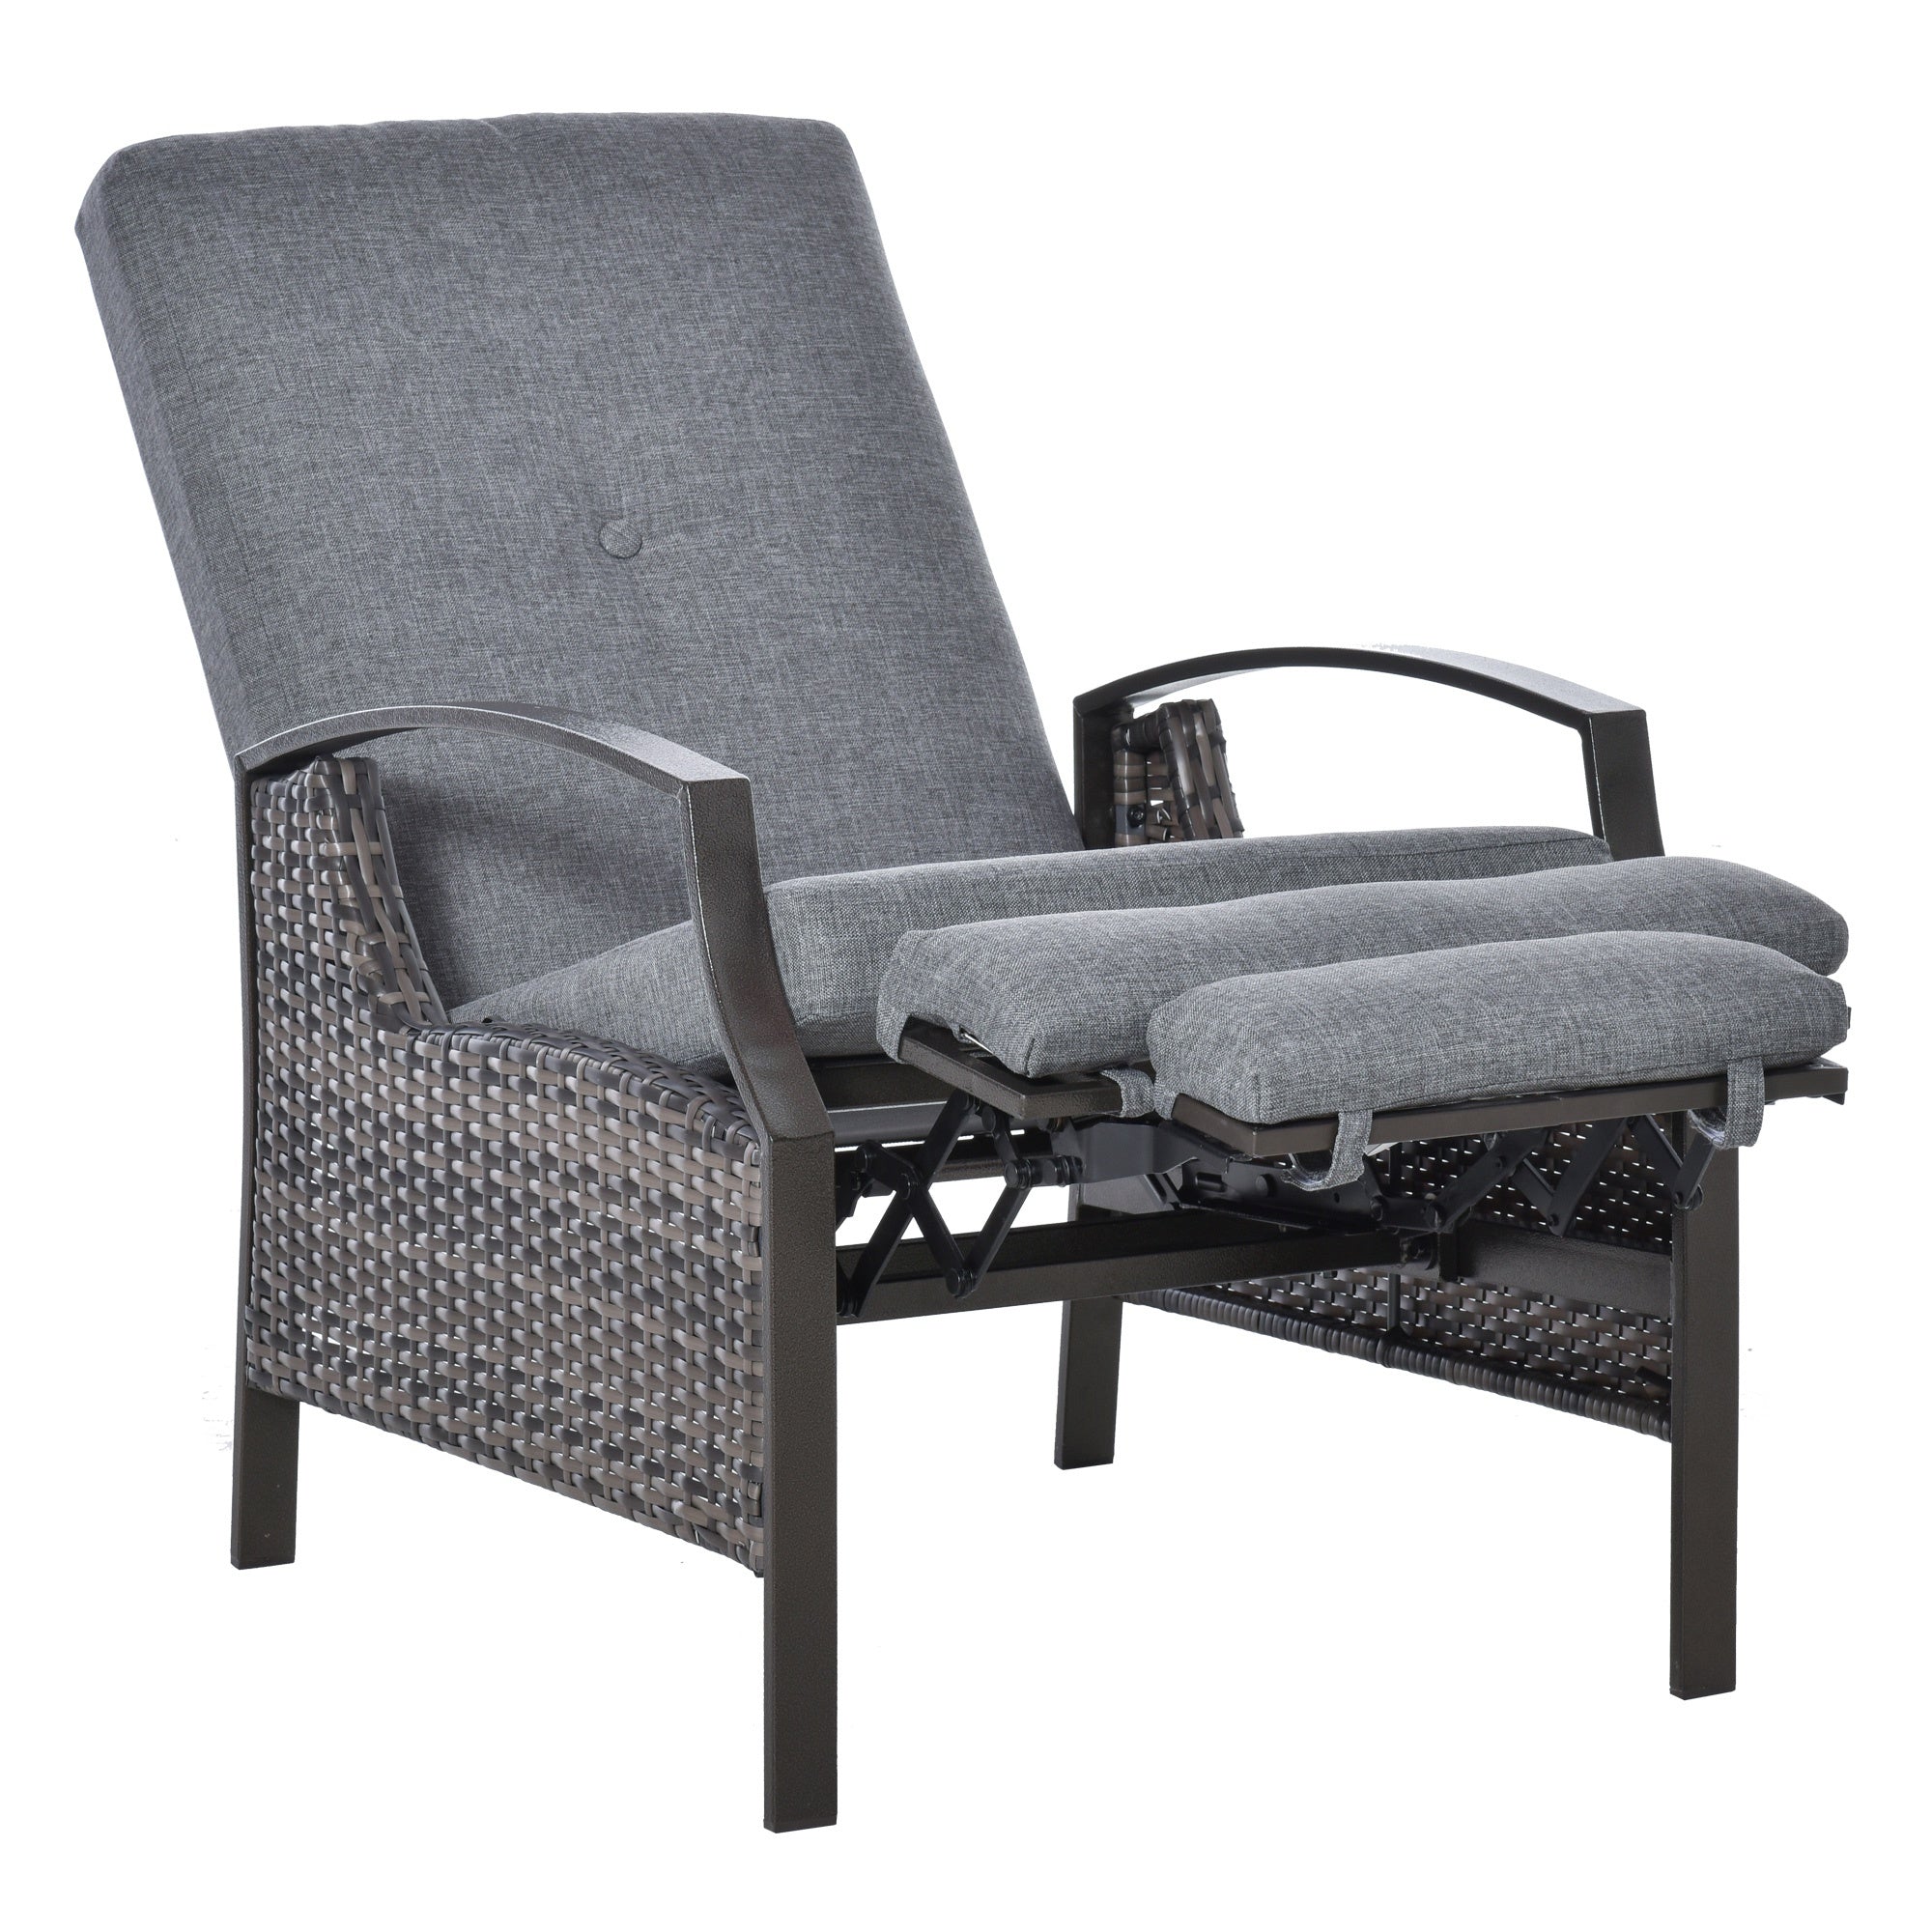 Rattan Adjustable Recliner Chair with Hand-Woven All-Weather Wicker for Patio Garden, Poolside,